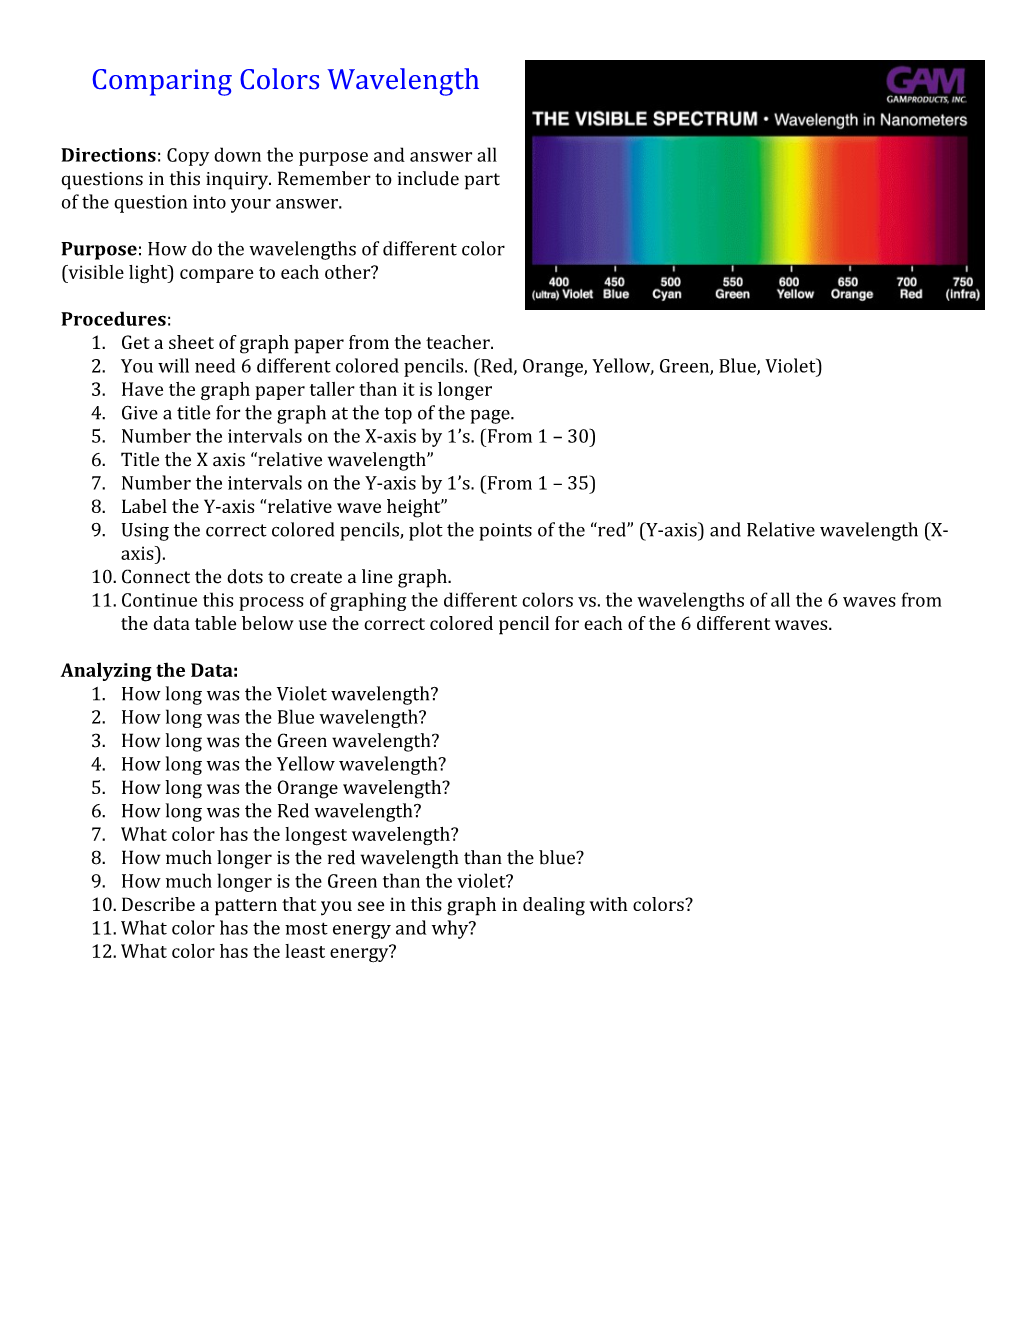 Purpose: How Do the Wavelengths of Different Color (Visible Light) Compare to Each Other?